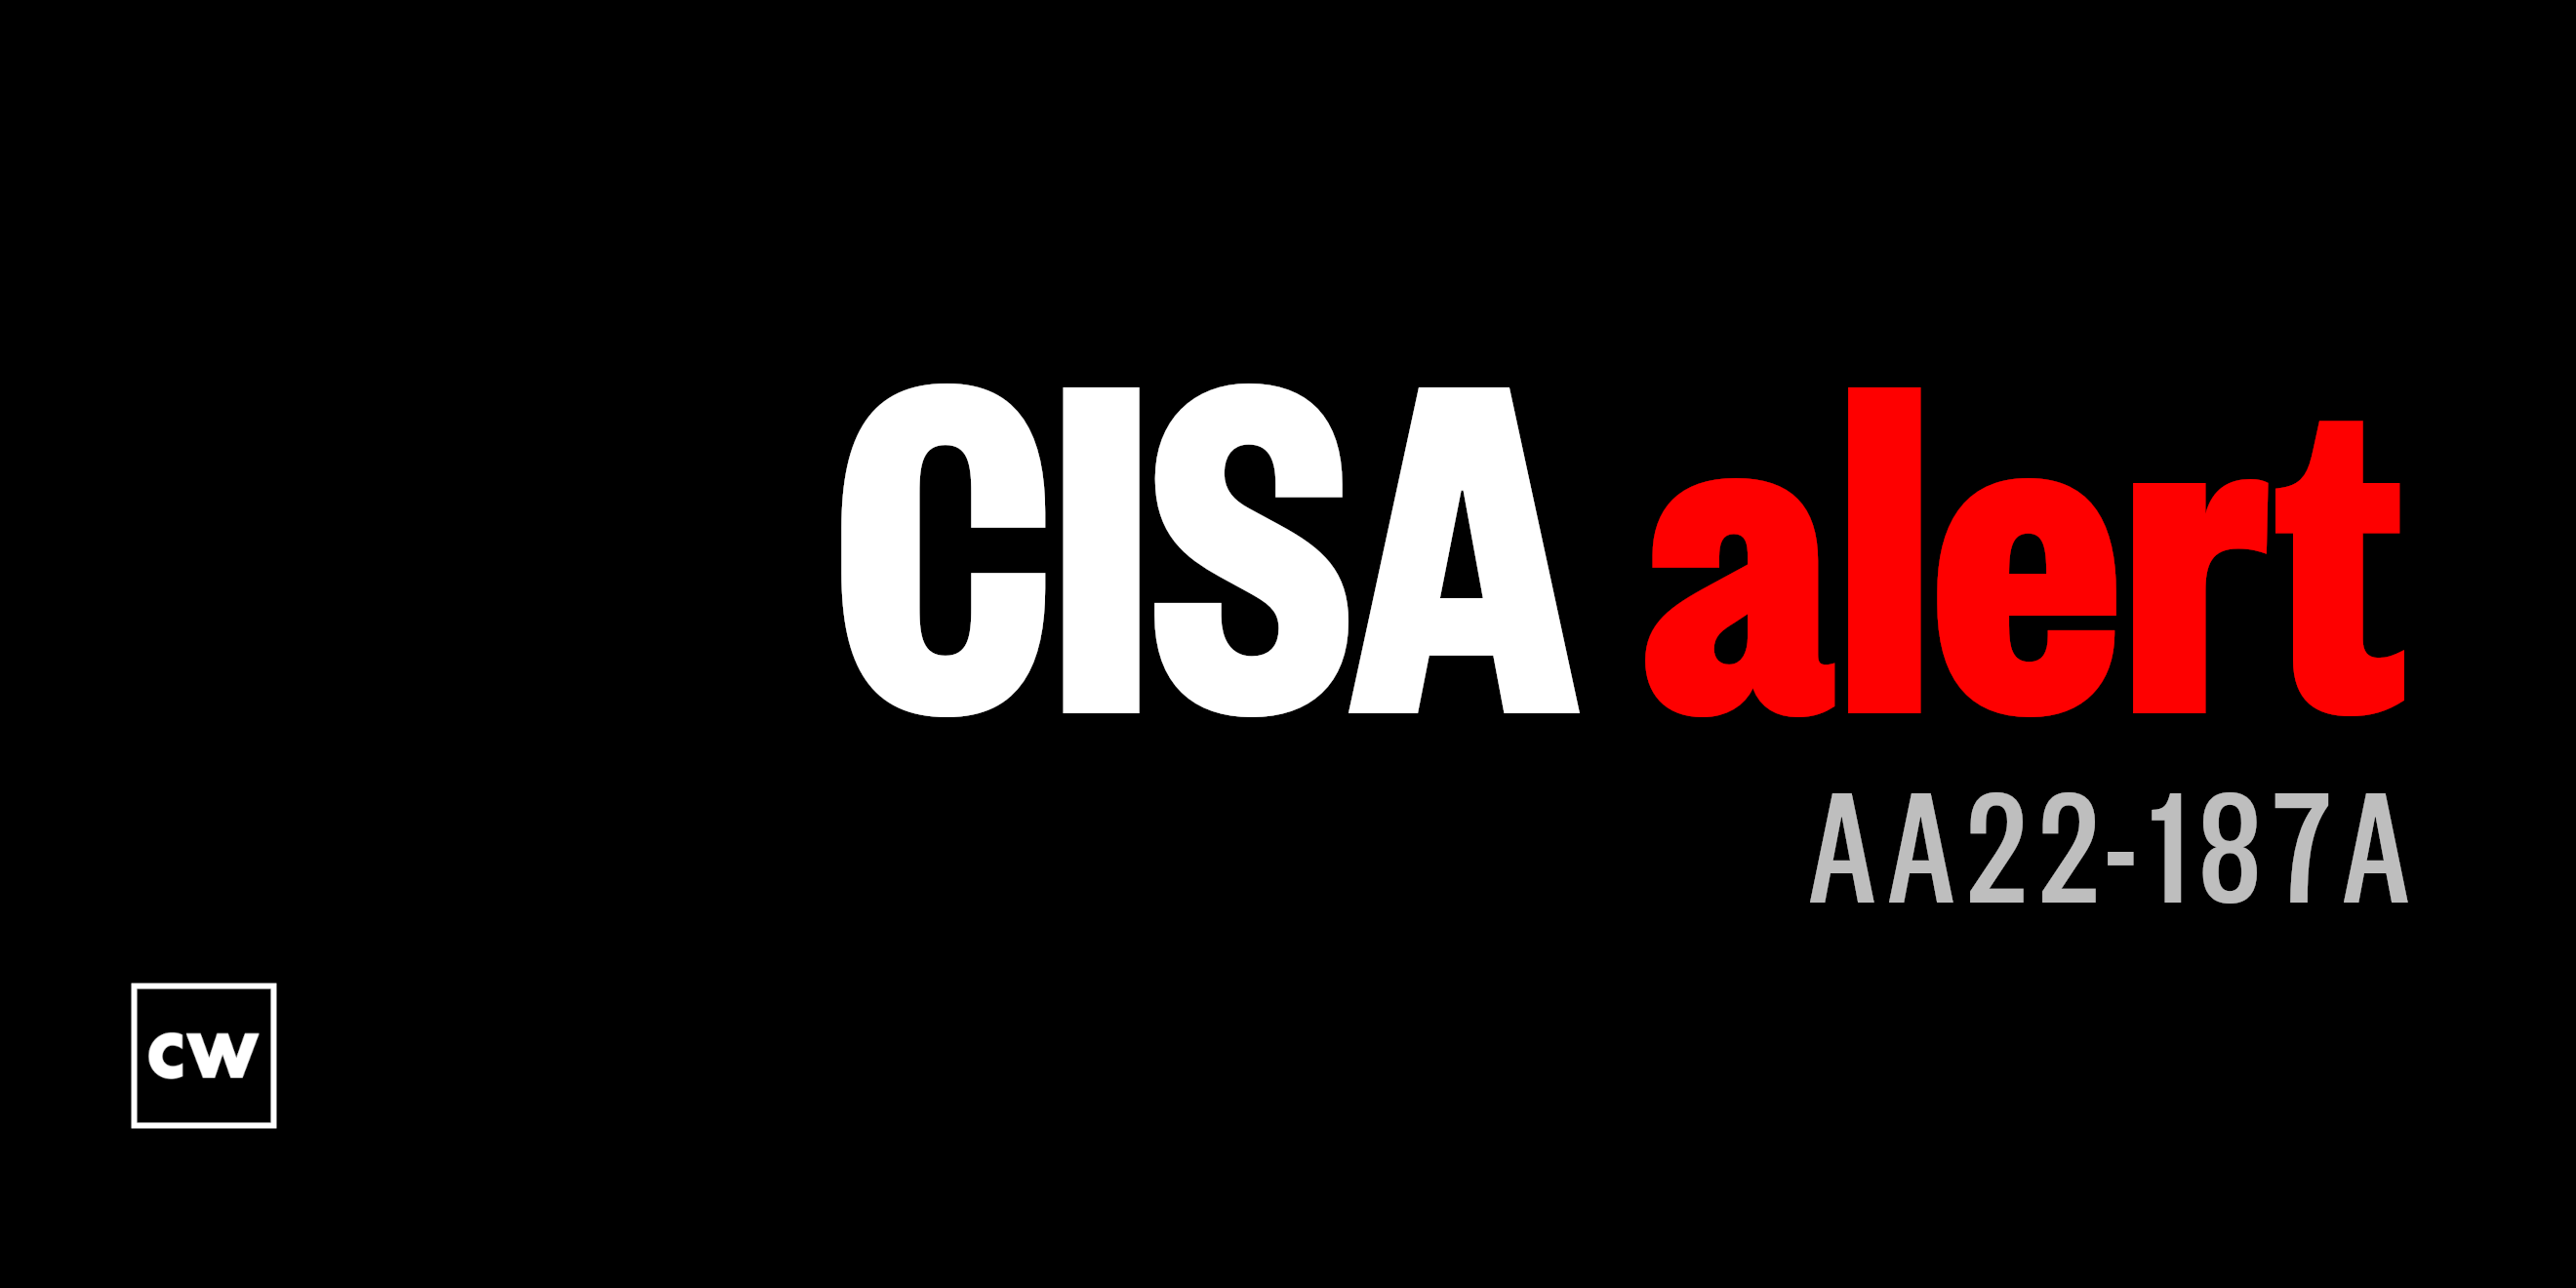 CISA Cybersecurity Alerts 7.6.22